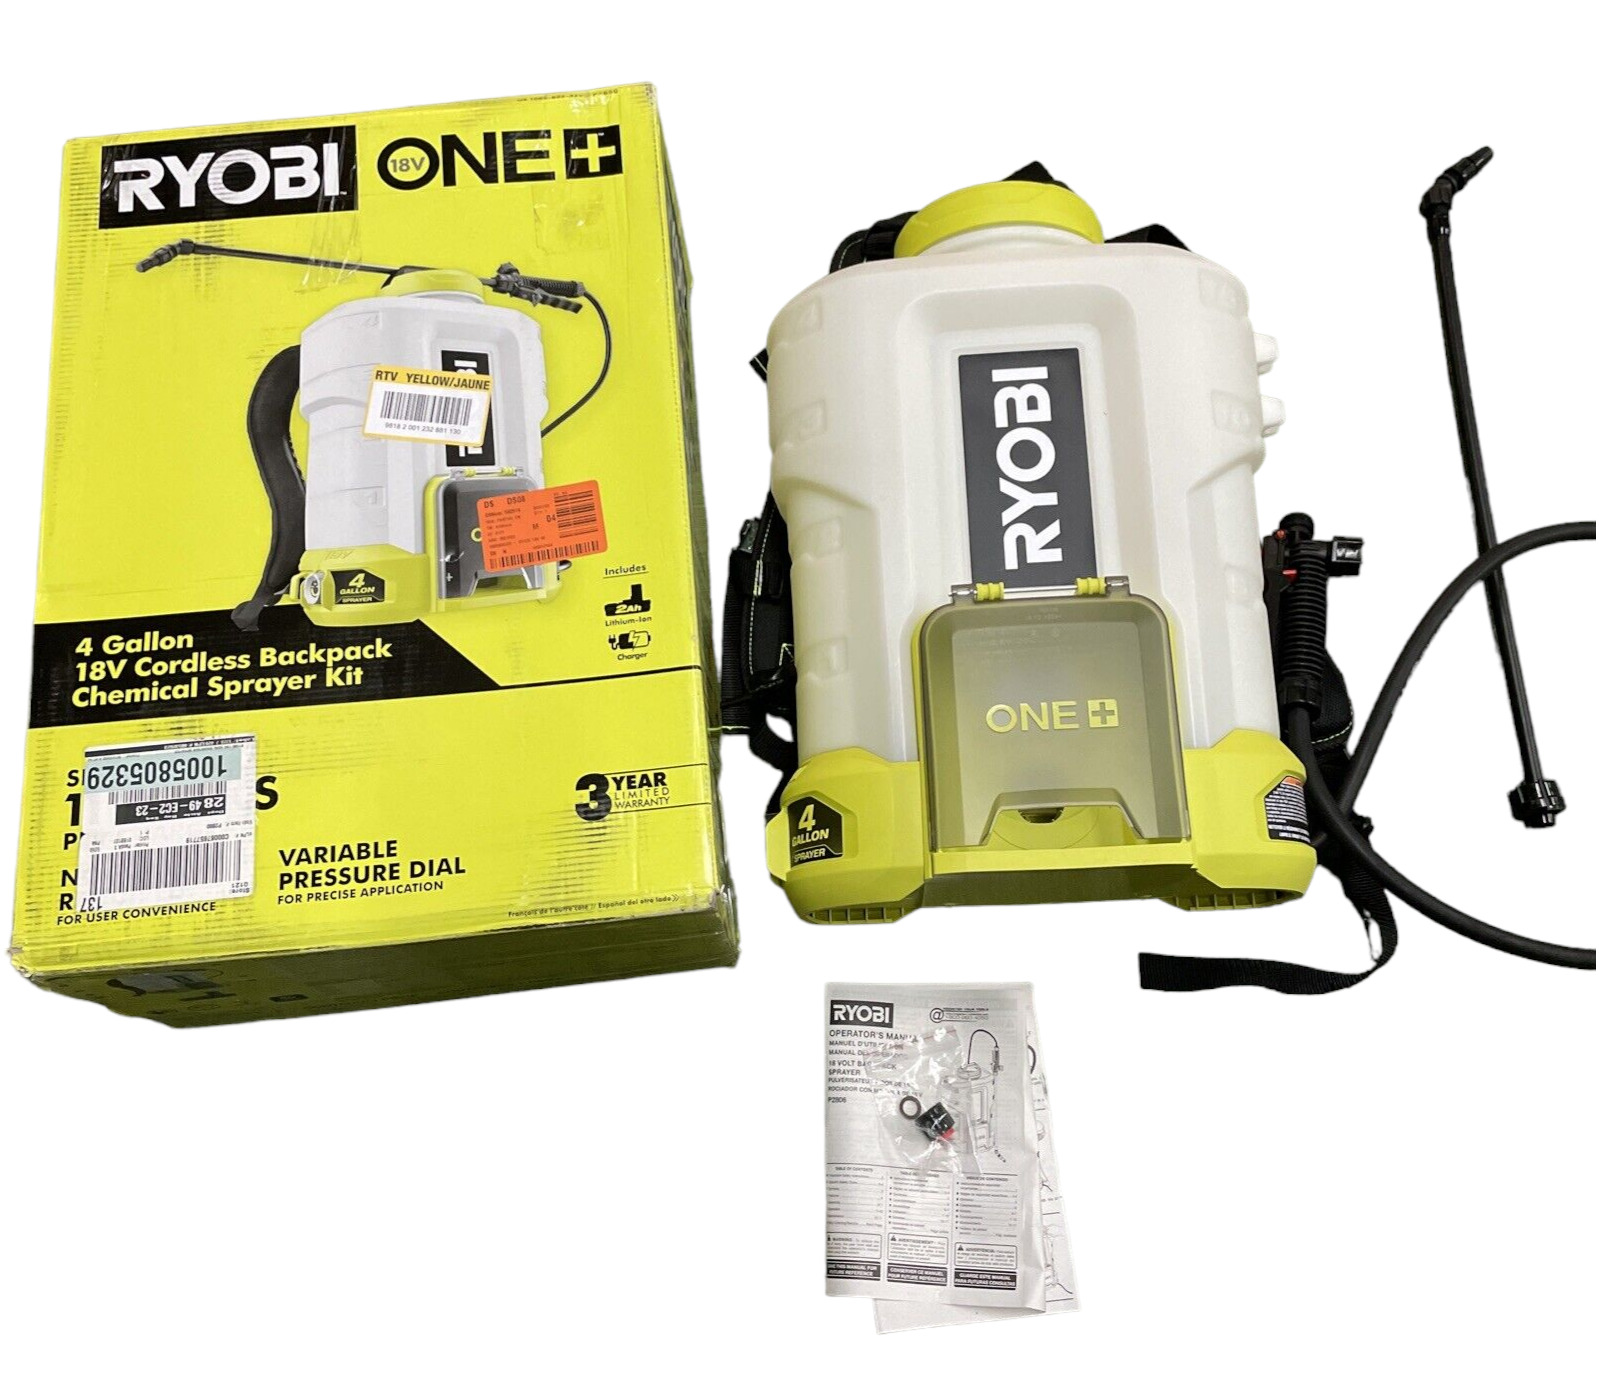 Used - Ryobi One P2860 4 Gal Backpack Sprayer (Tool Only)